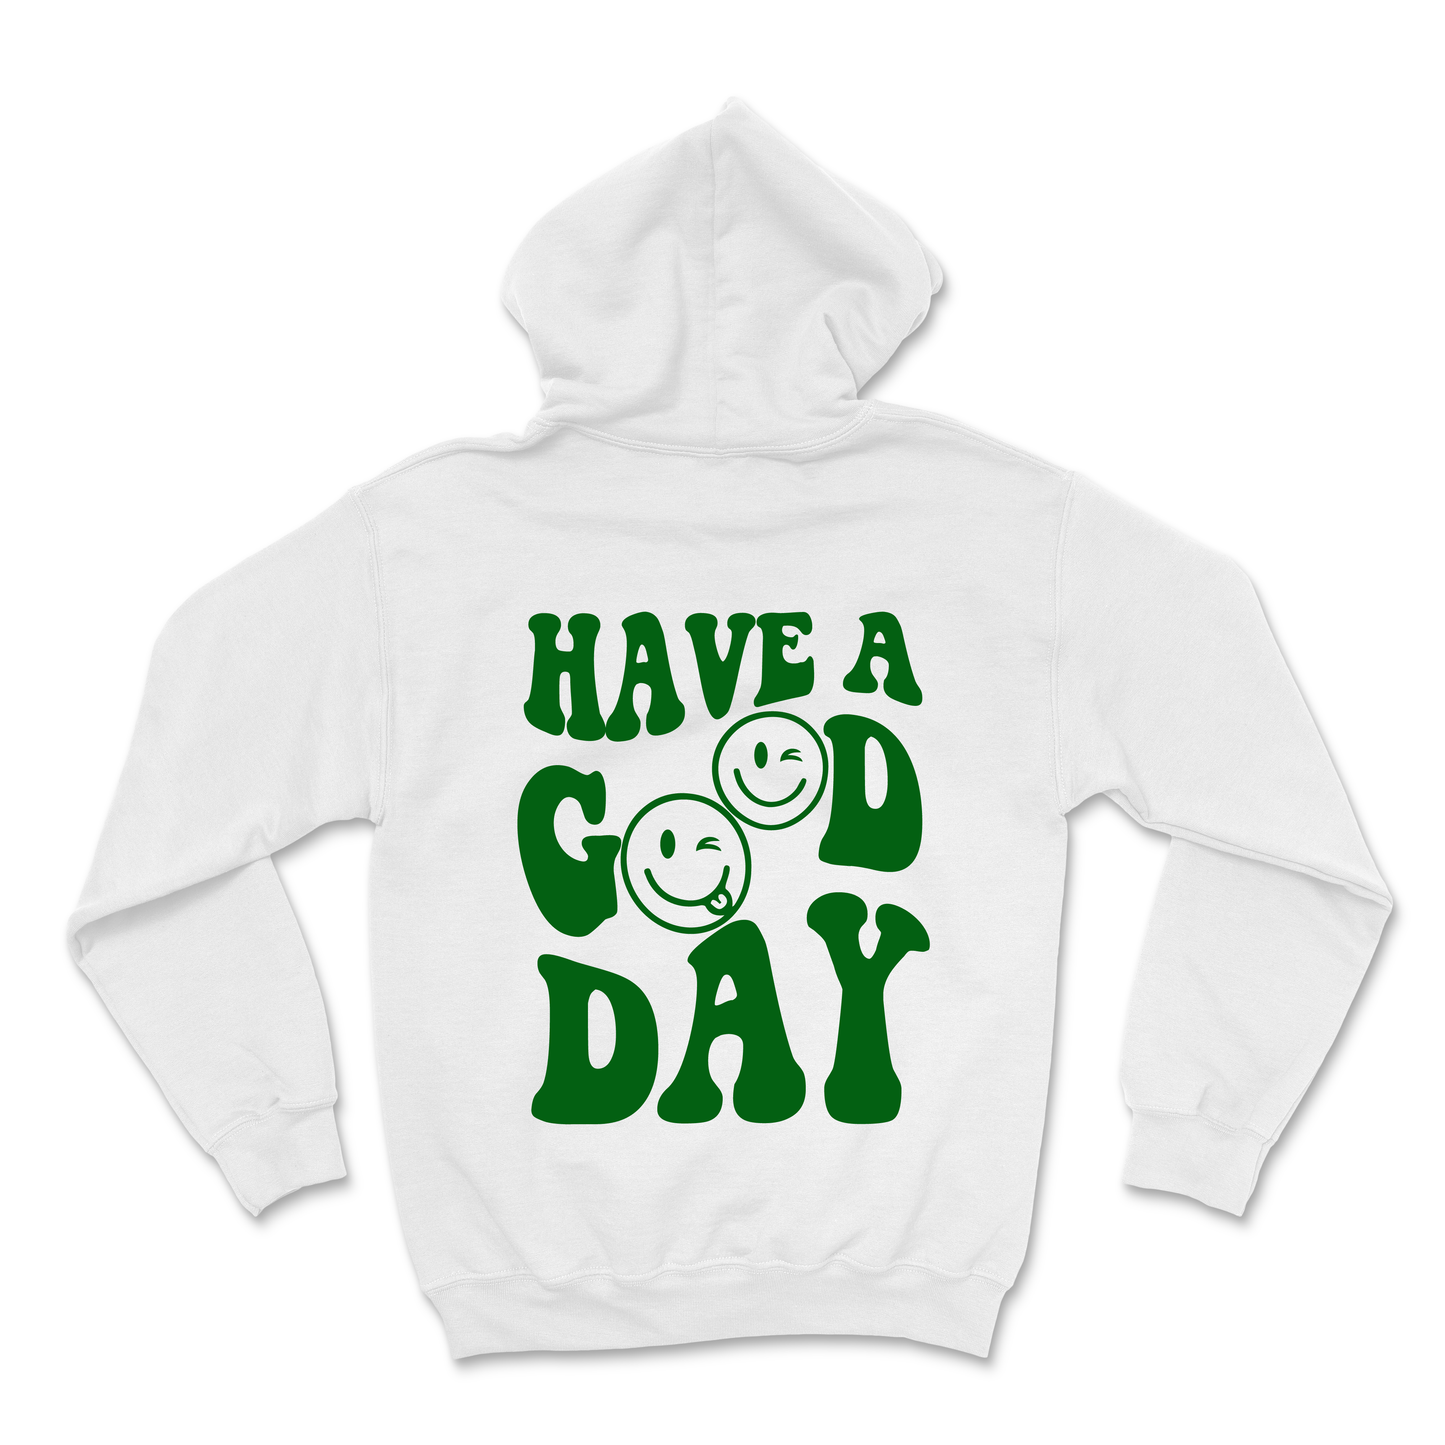 HAVE A GOOD DAY SWEATER <BR>MORE COLORS AVAILABLE